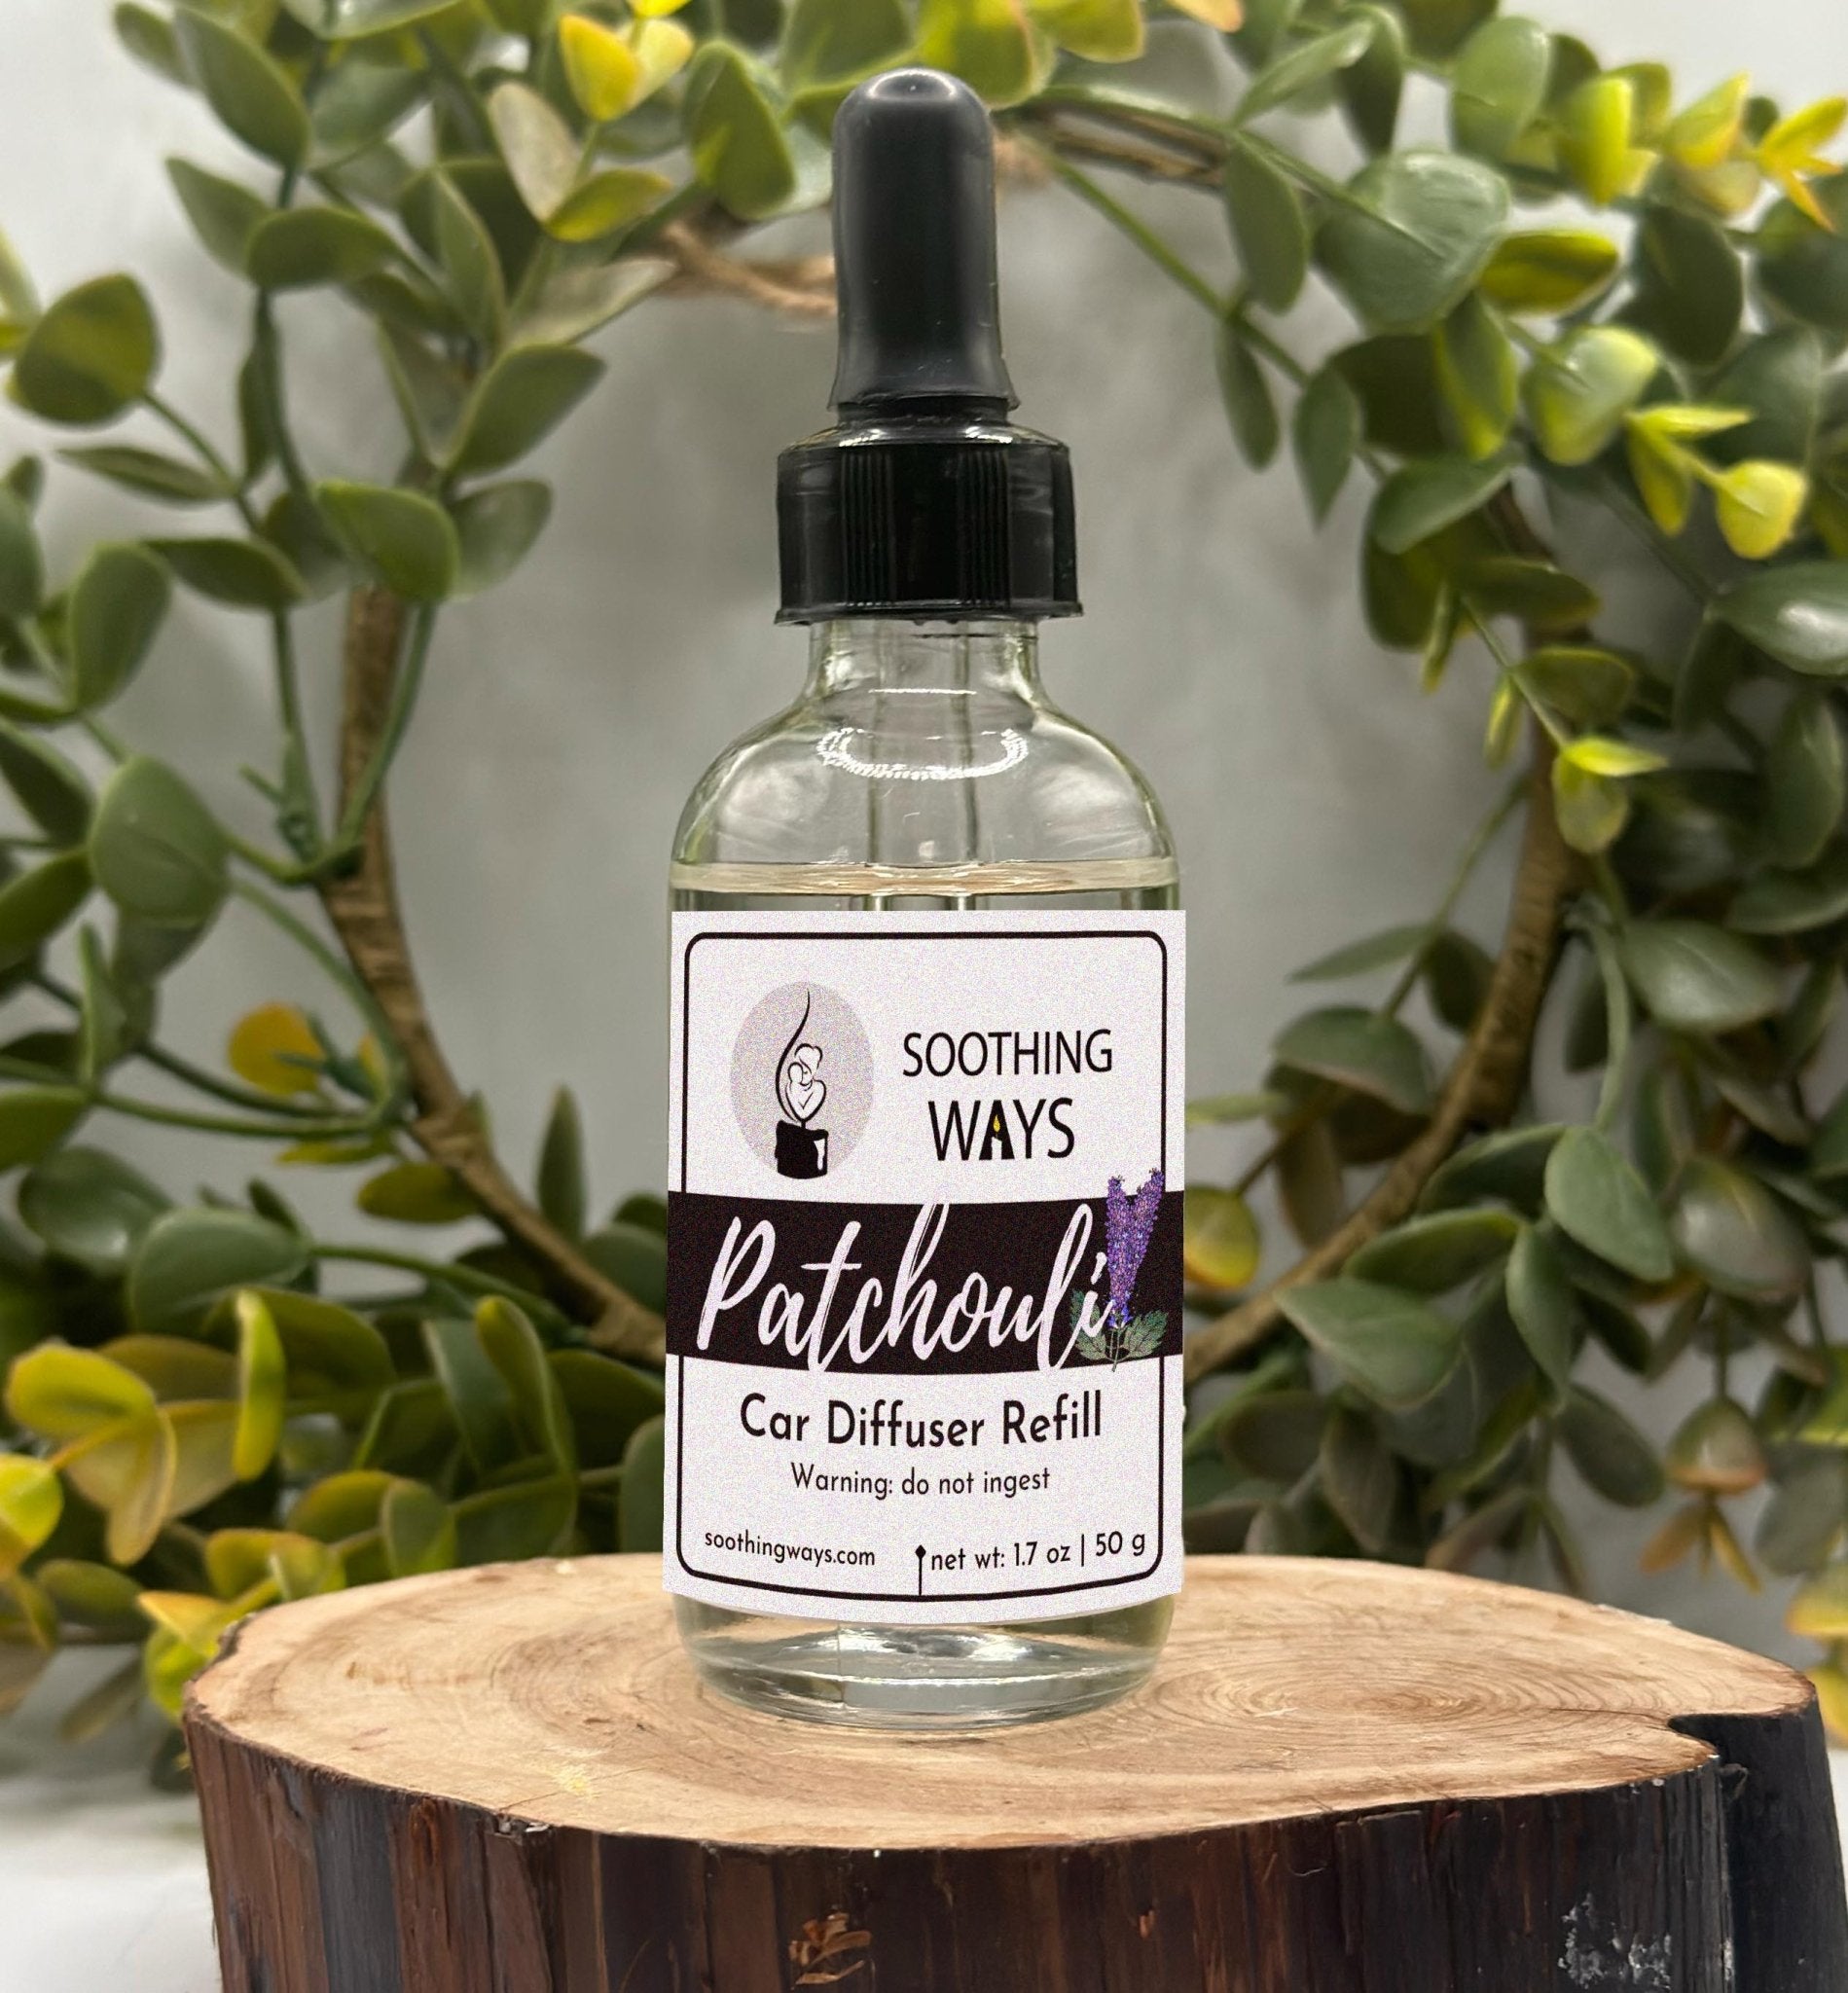 Patchouli - Car Diffuser Fragrance Refill - Soothing Ways